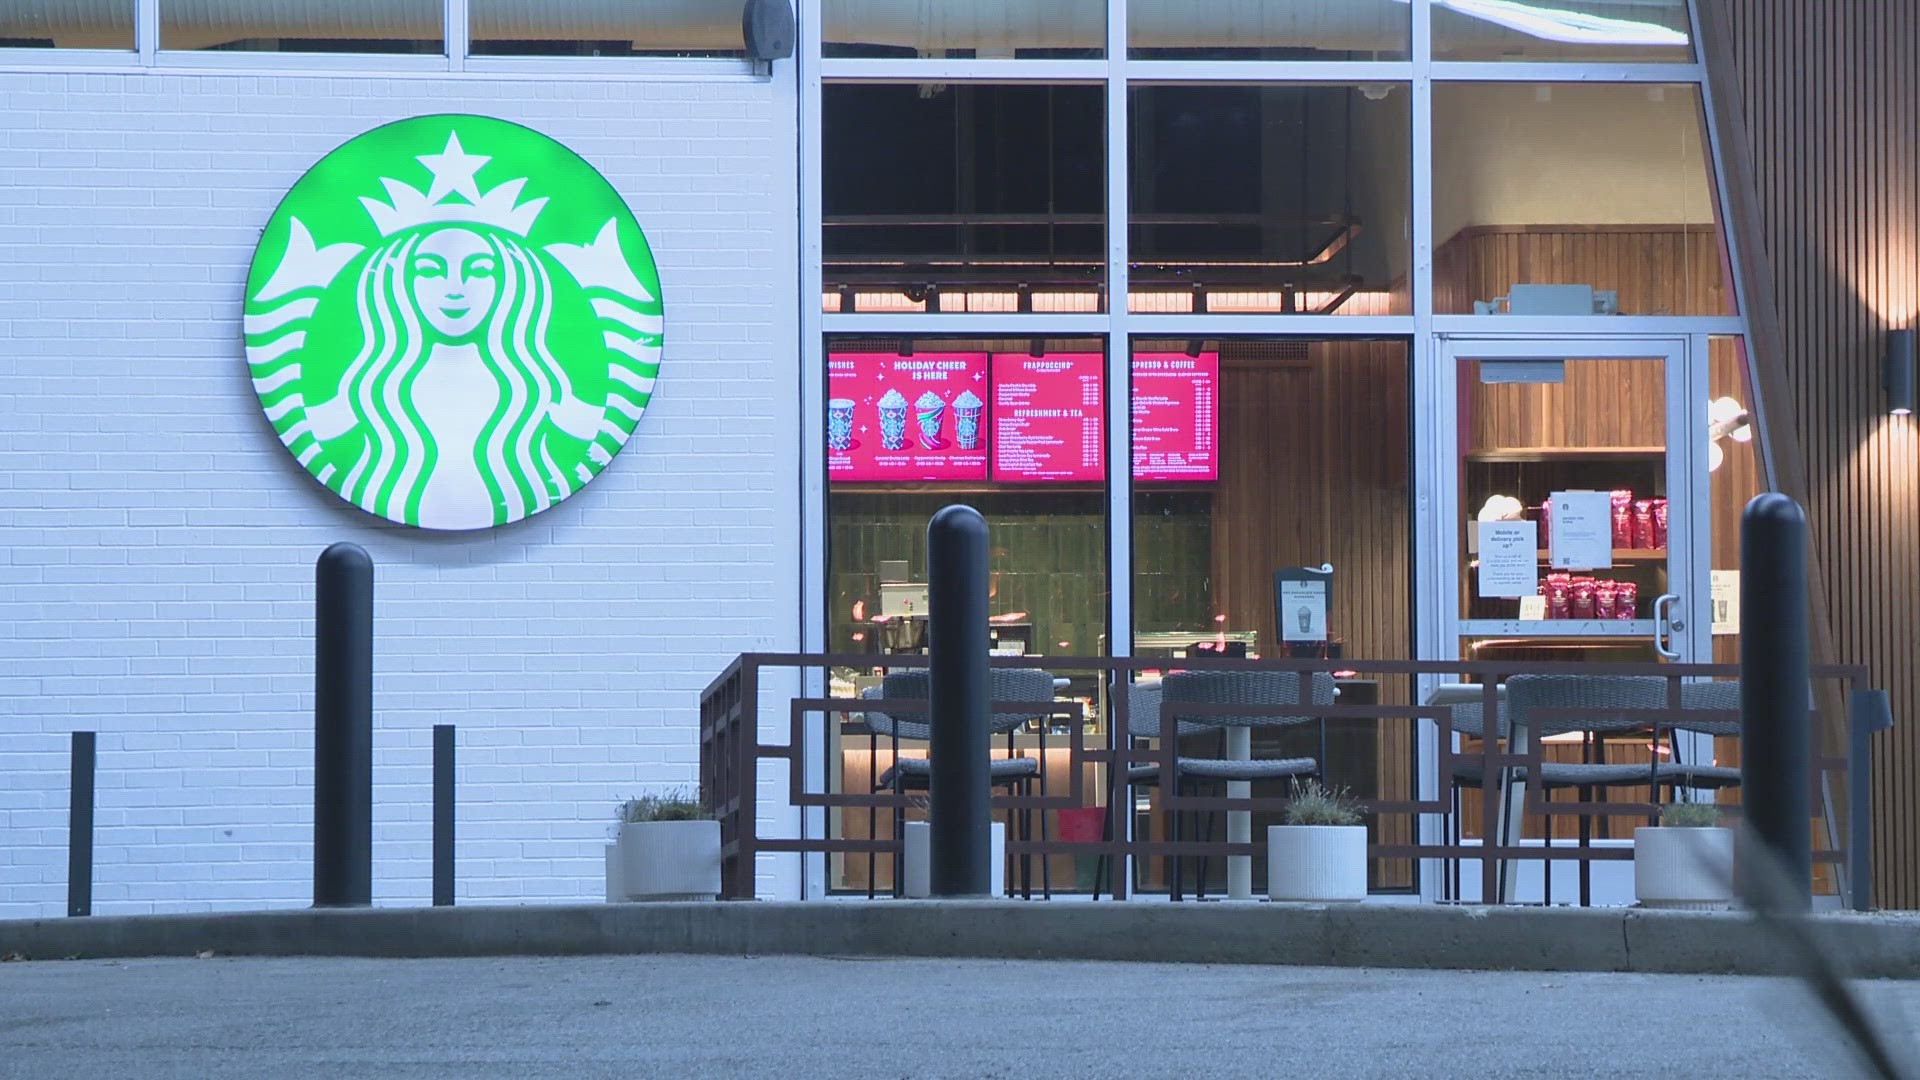 A man who tried to rob a Starbucks in St. Louis Sunday afternoon ended up being held by employees until police could arrive. It happened at a Midtown location.